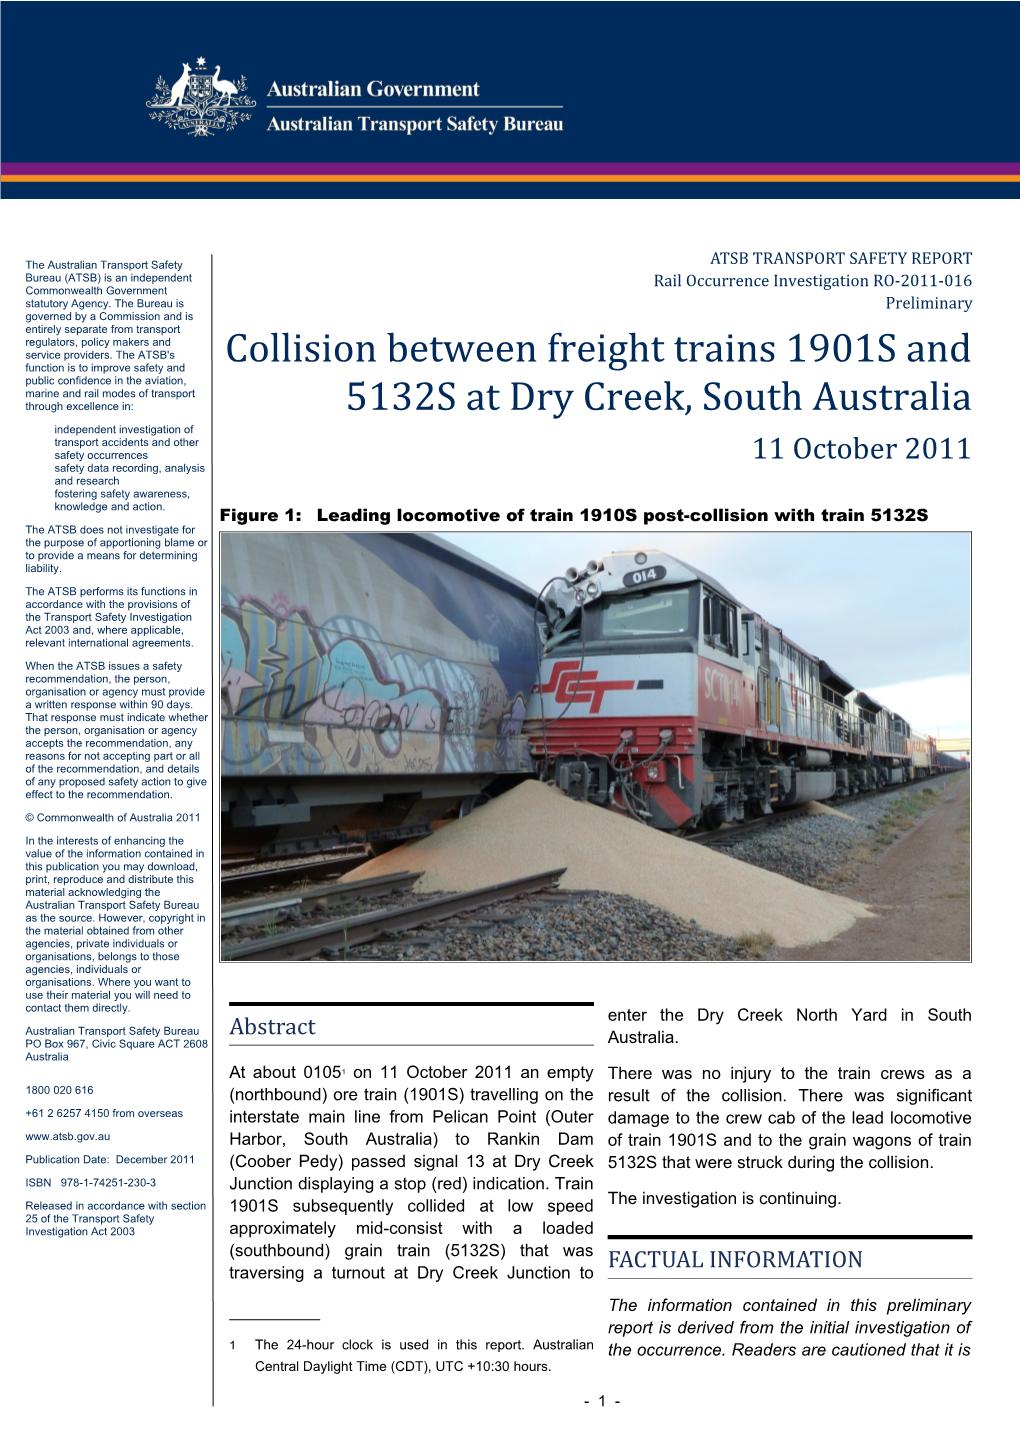 Collision Between Freight Trains 1901S and 5132S at Dry Creek, South Australia 11 October